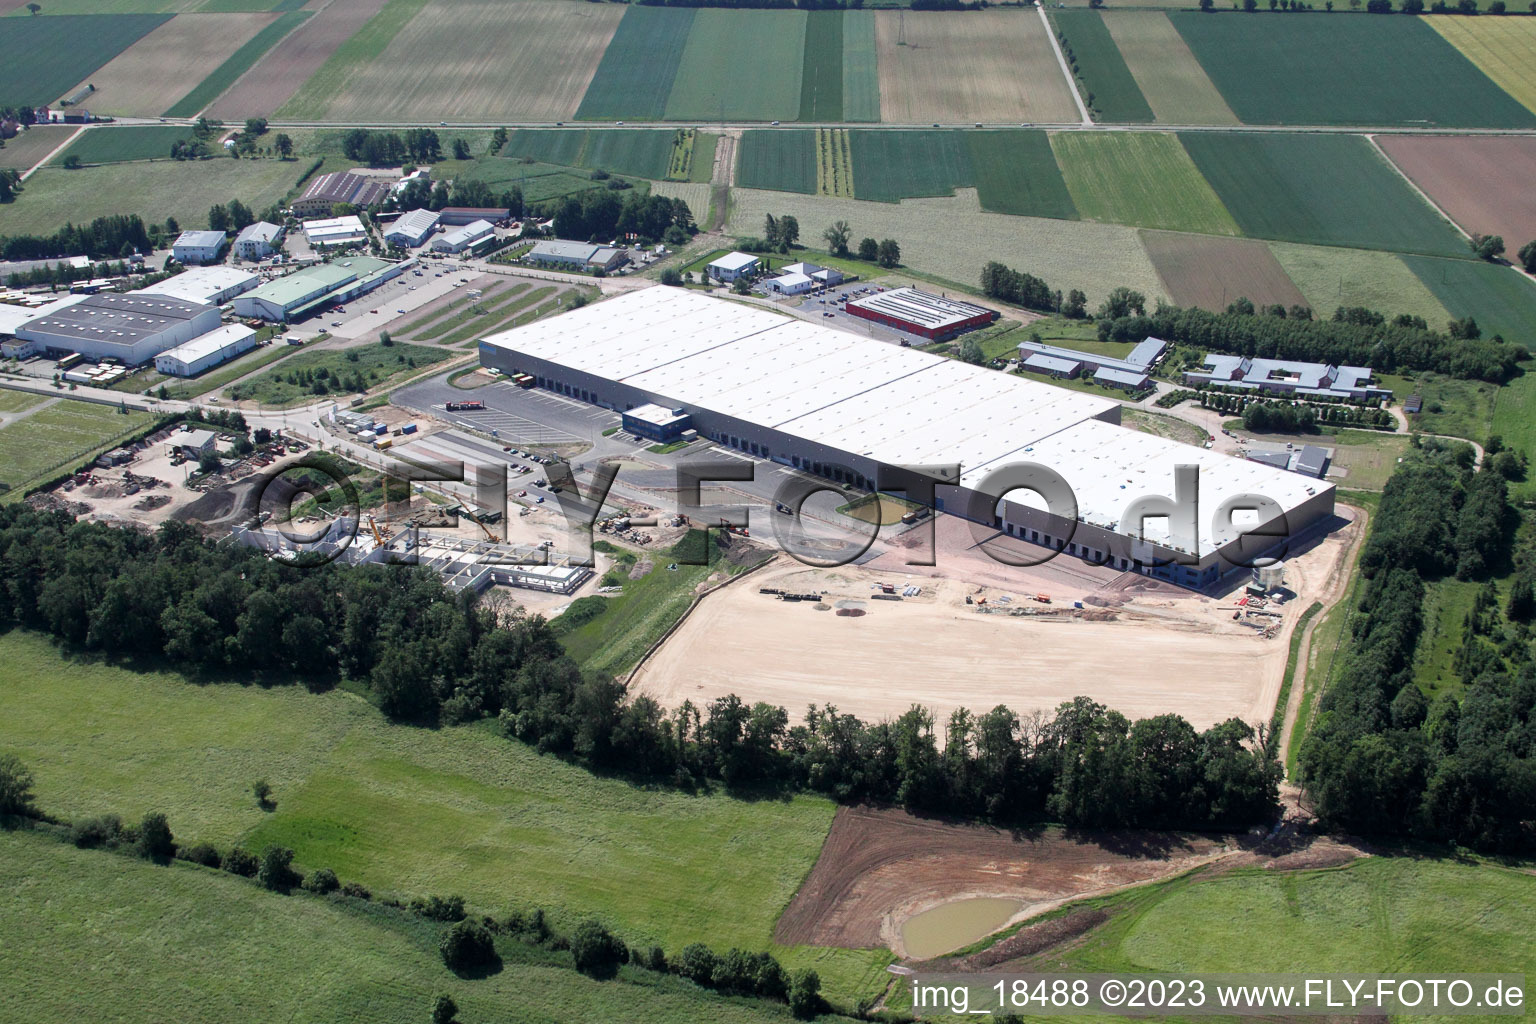 Coincidence logistics center in the district Minderslachen in Kandel in the state Rhineland-Palatinate, Germany from the drone perspective